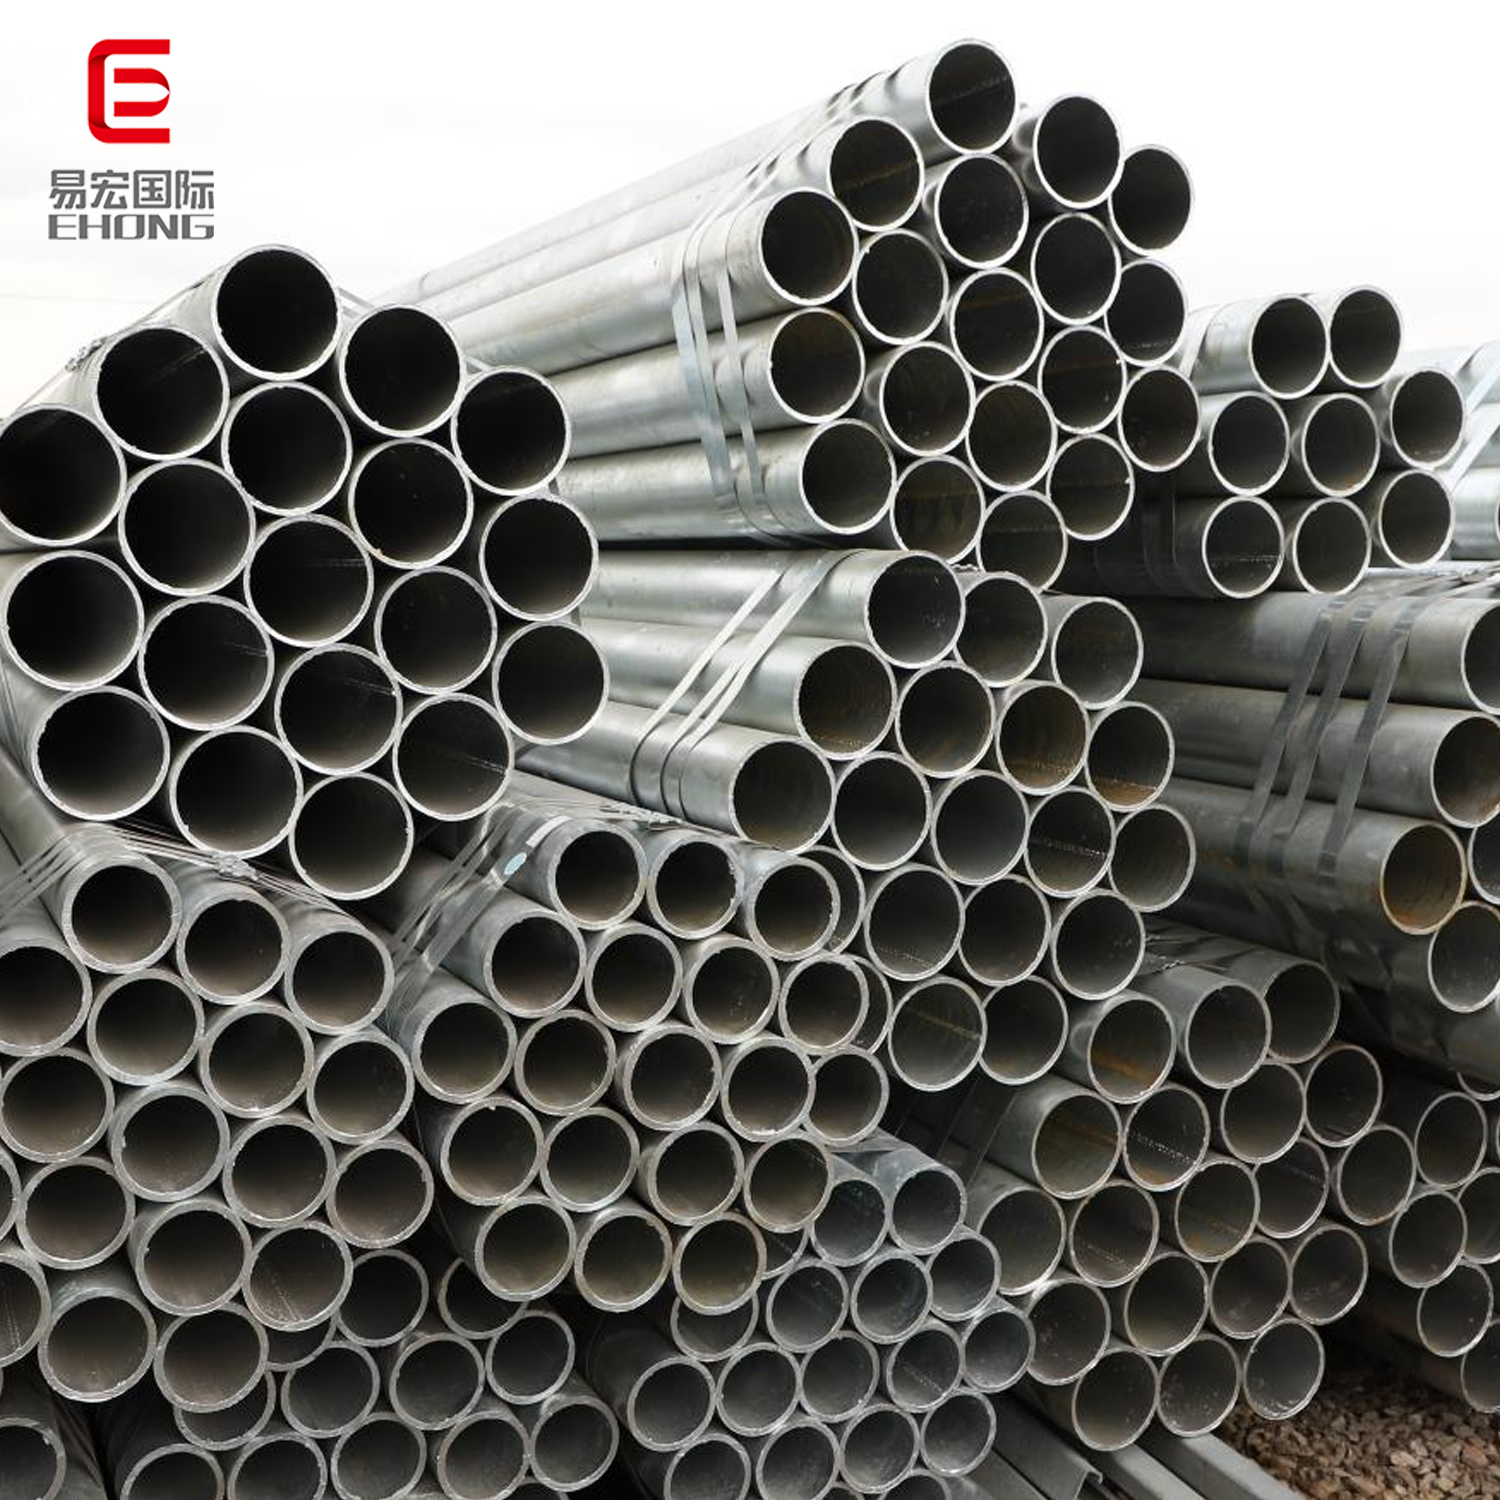 Do you know how long the life of galvanized steel pipe is generally?